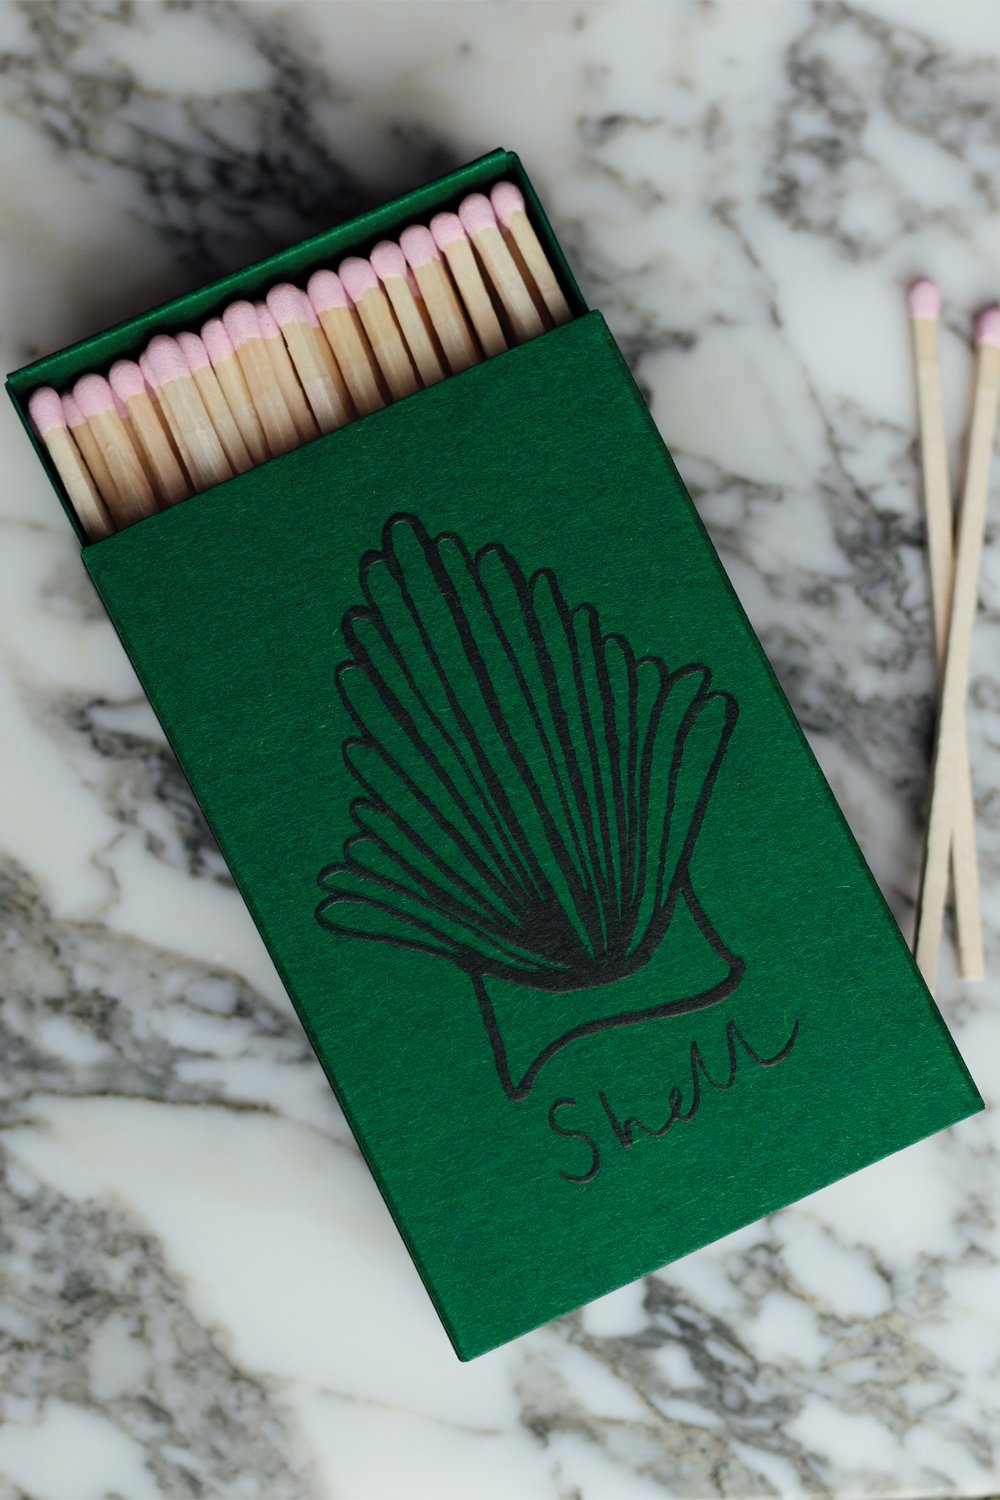 Matches, The Frugality £9